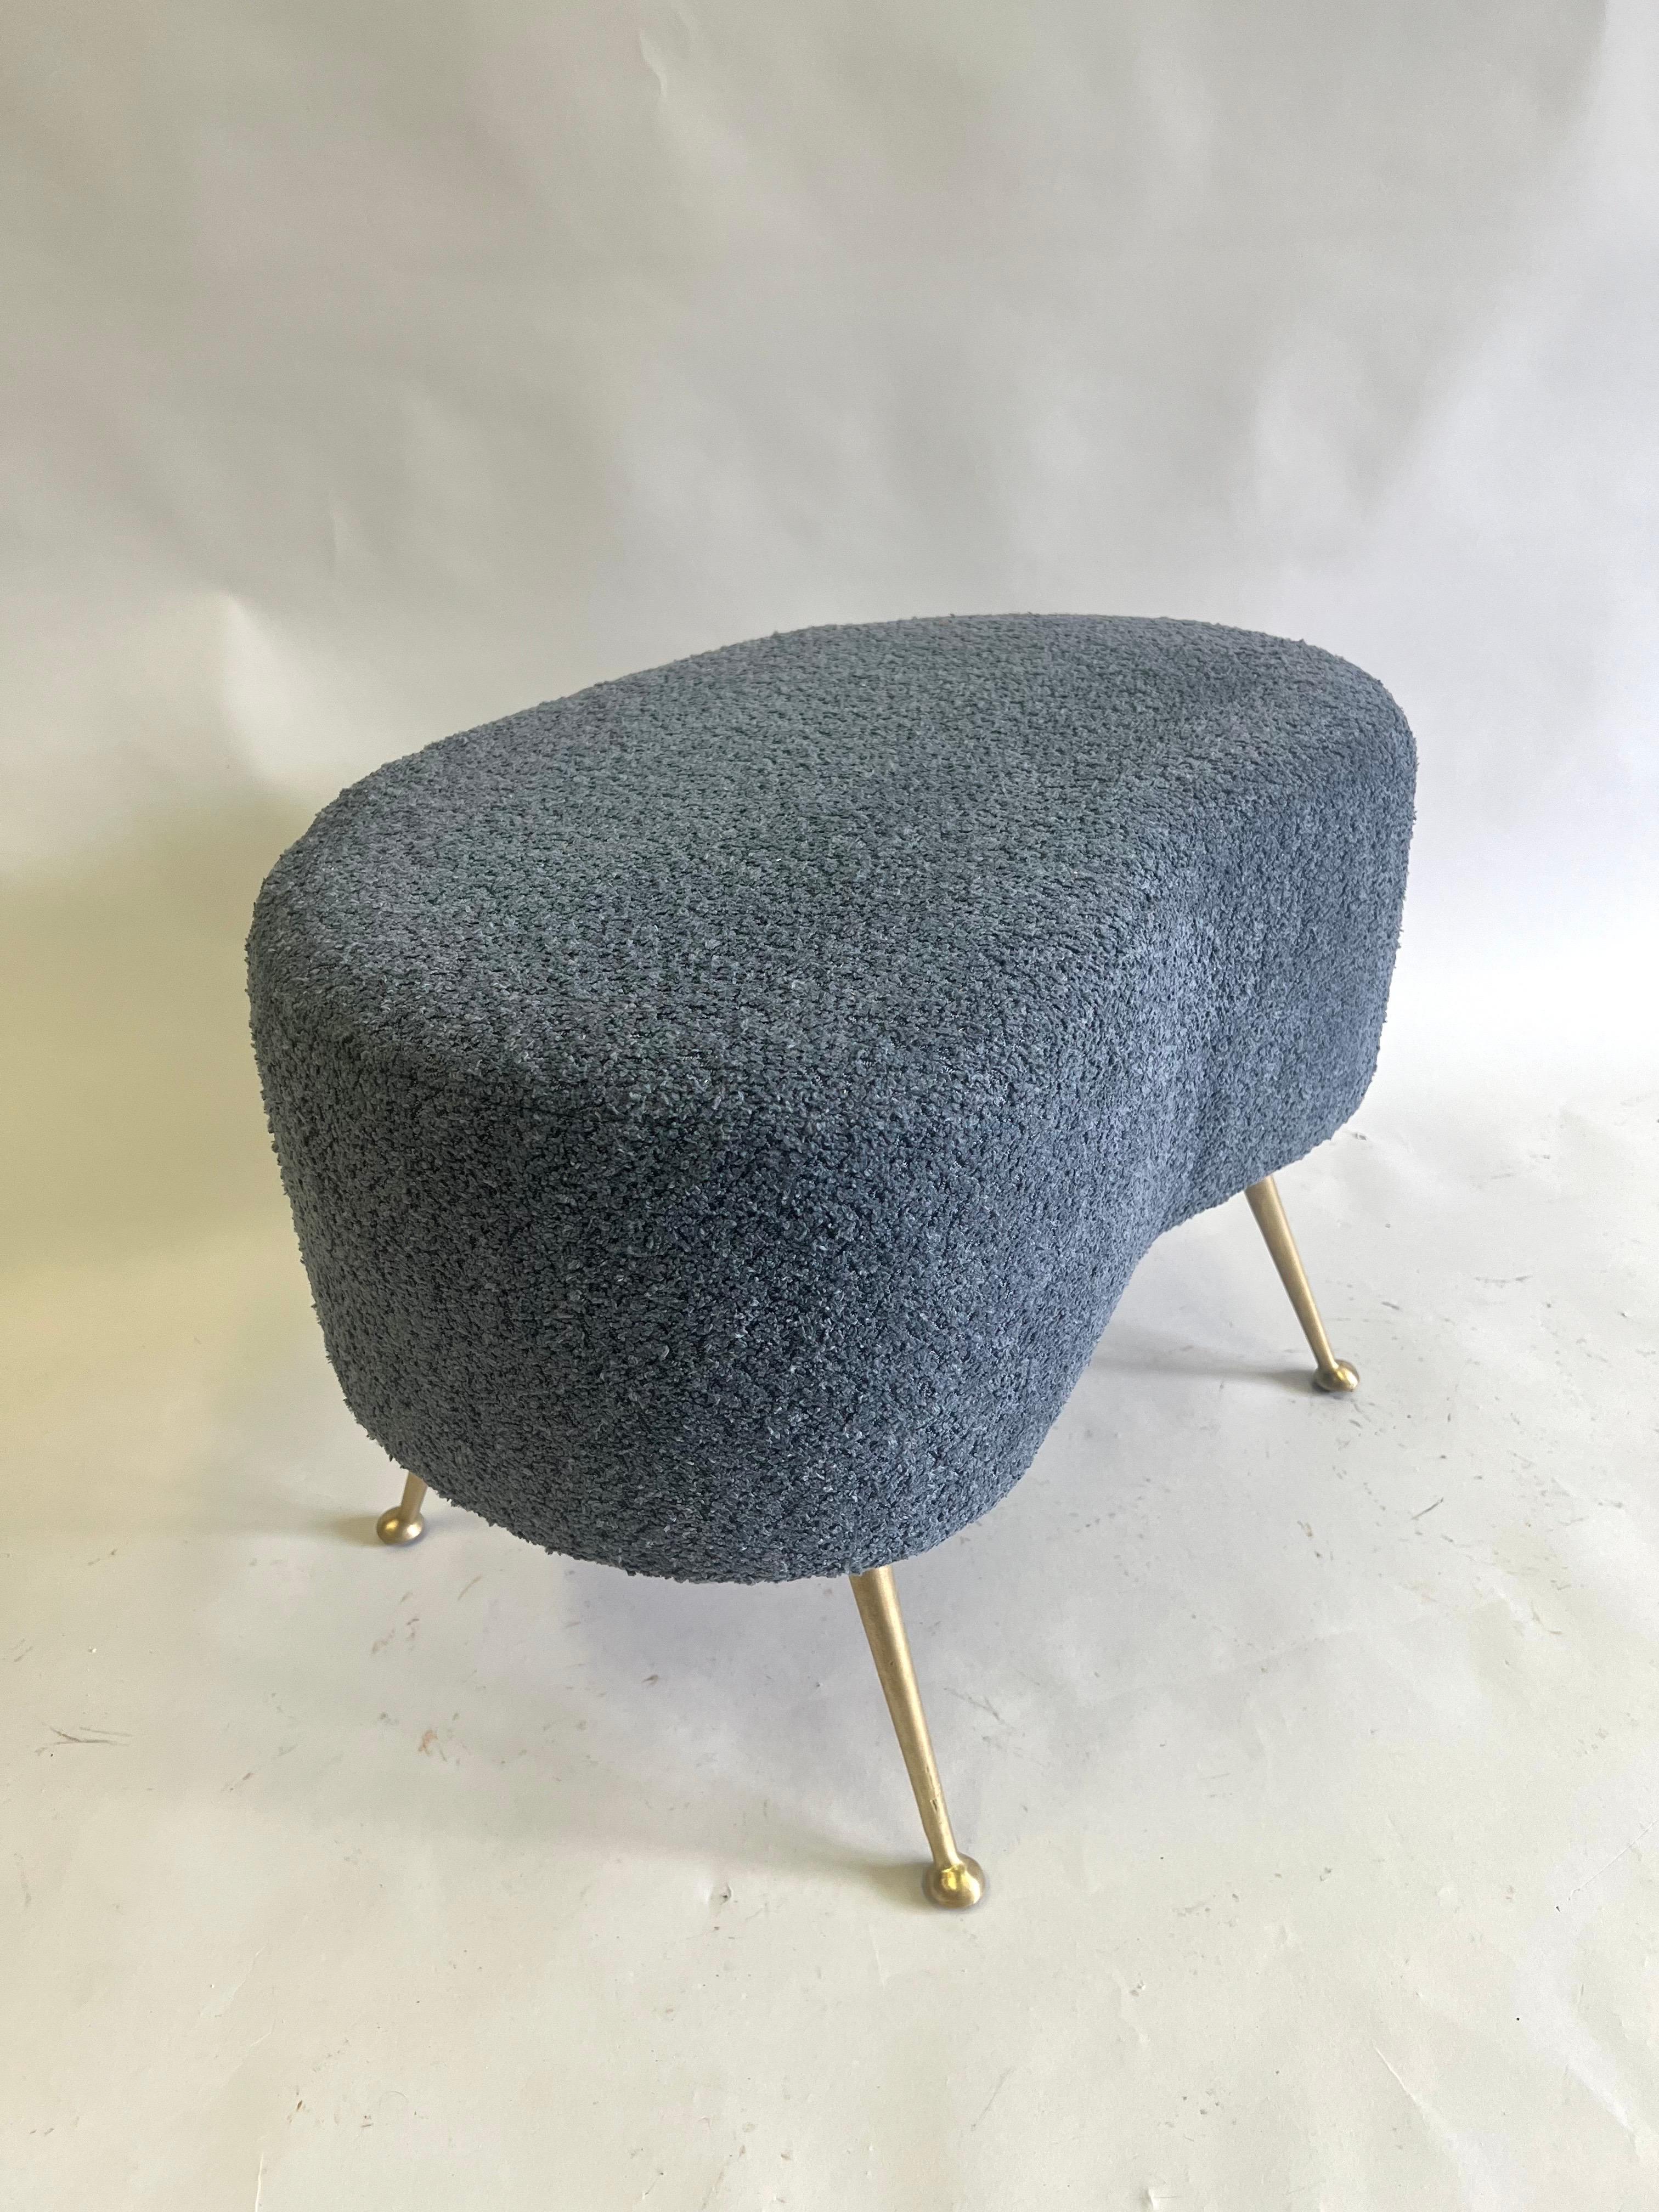 Pair of Italian Mid-Century Organic Modern Stools attributed to Marco Zanuso For Sale 3